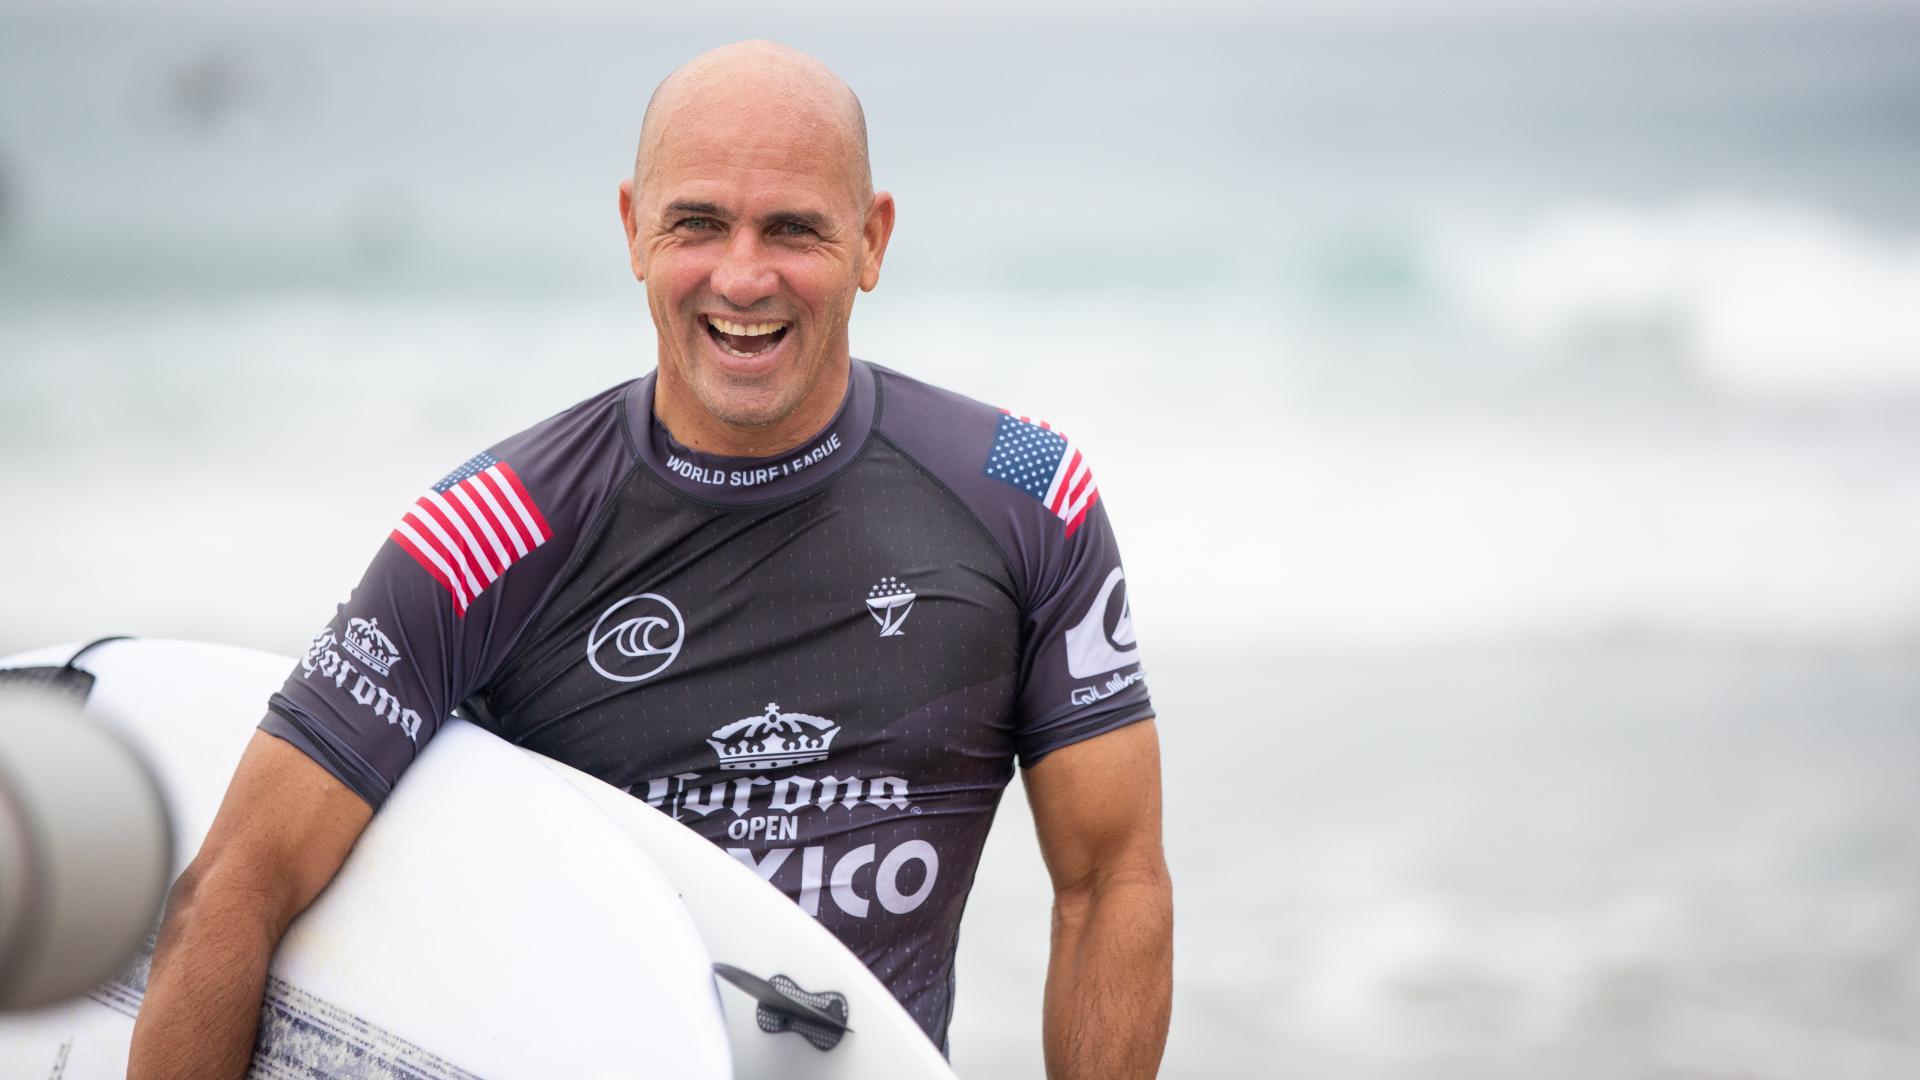 Kelly Slater wearing a black shirt hile holding a white surfboard